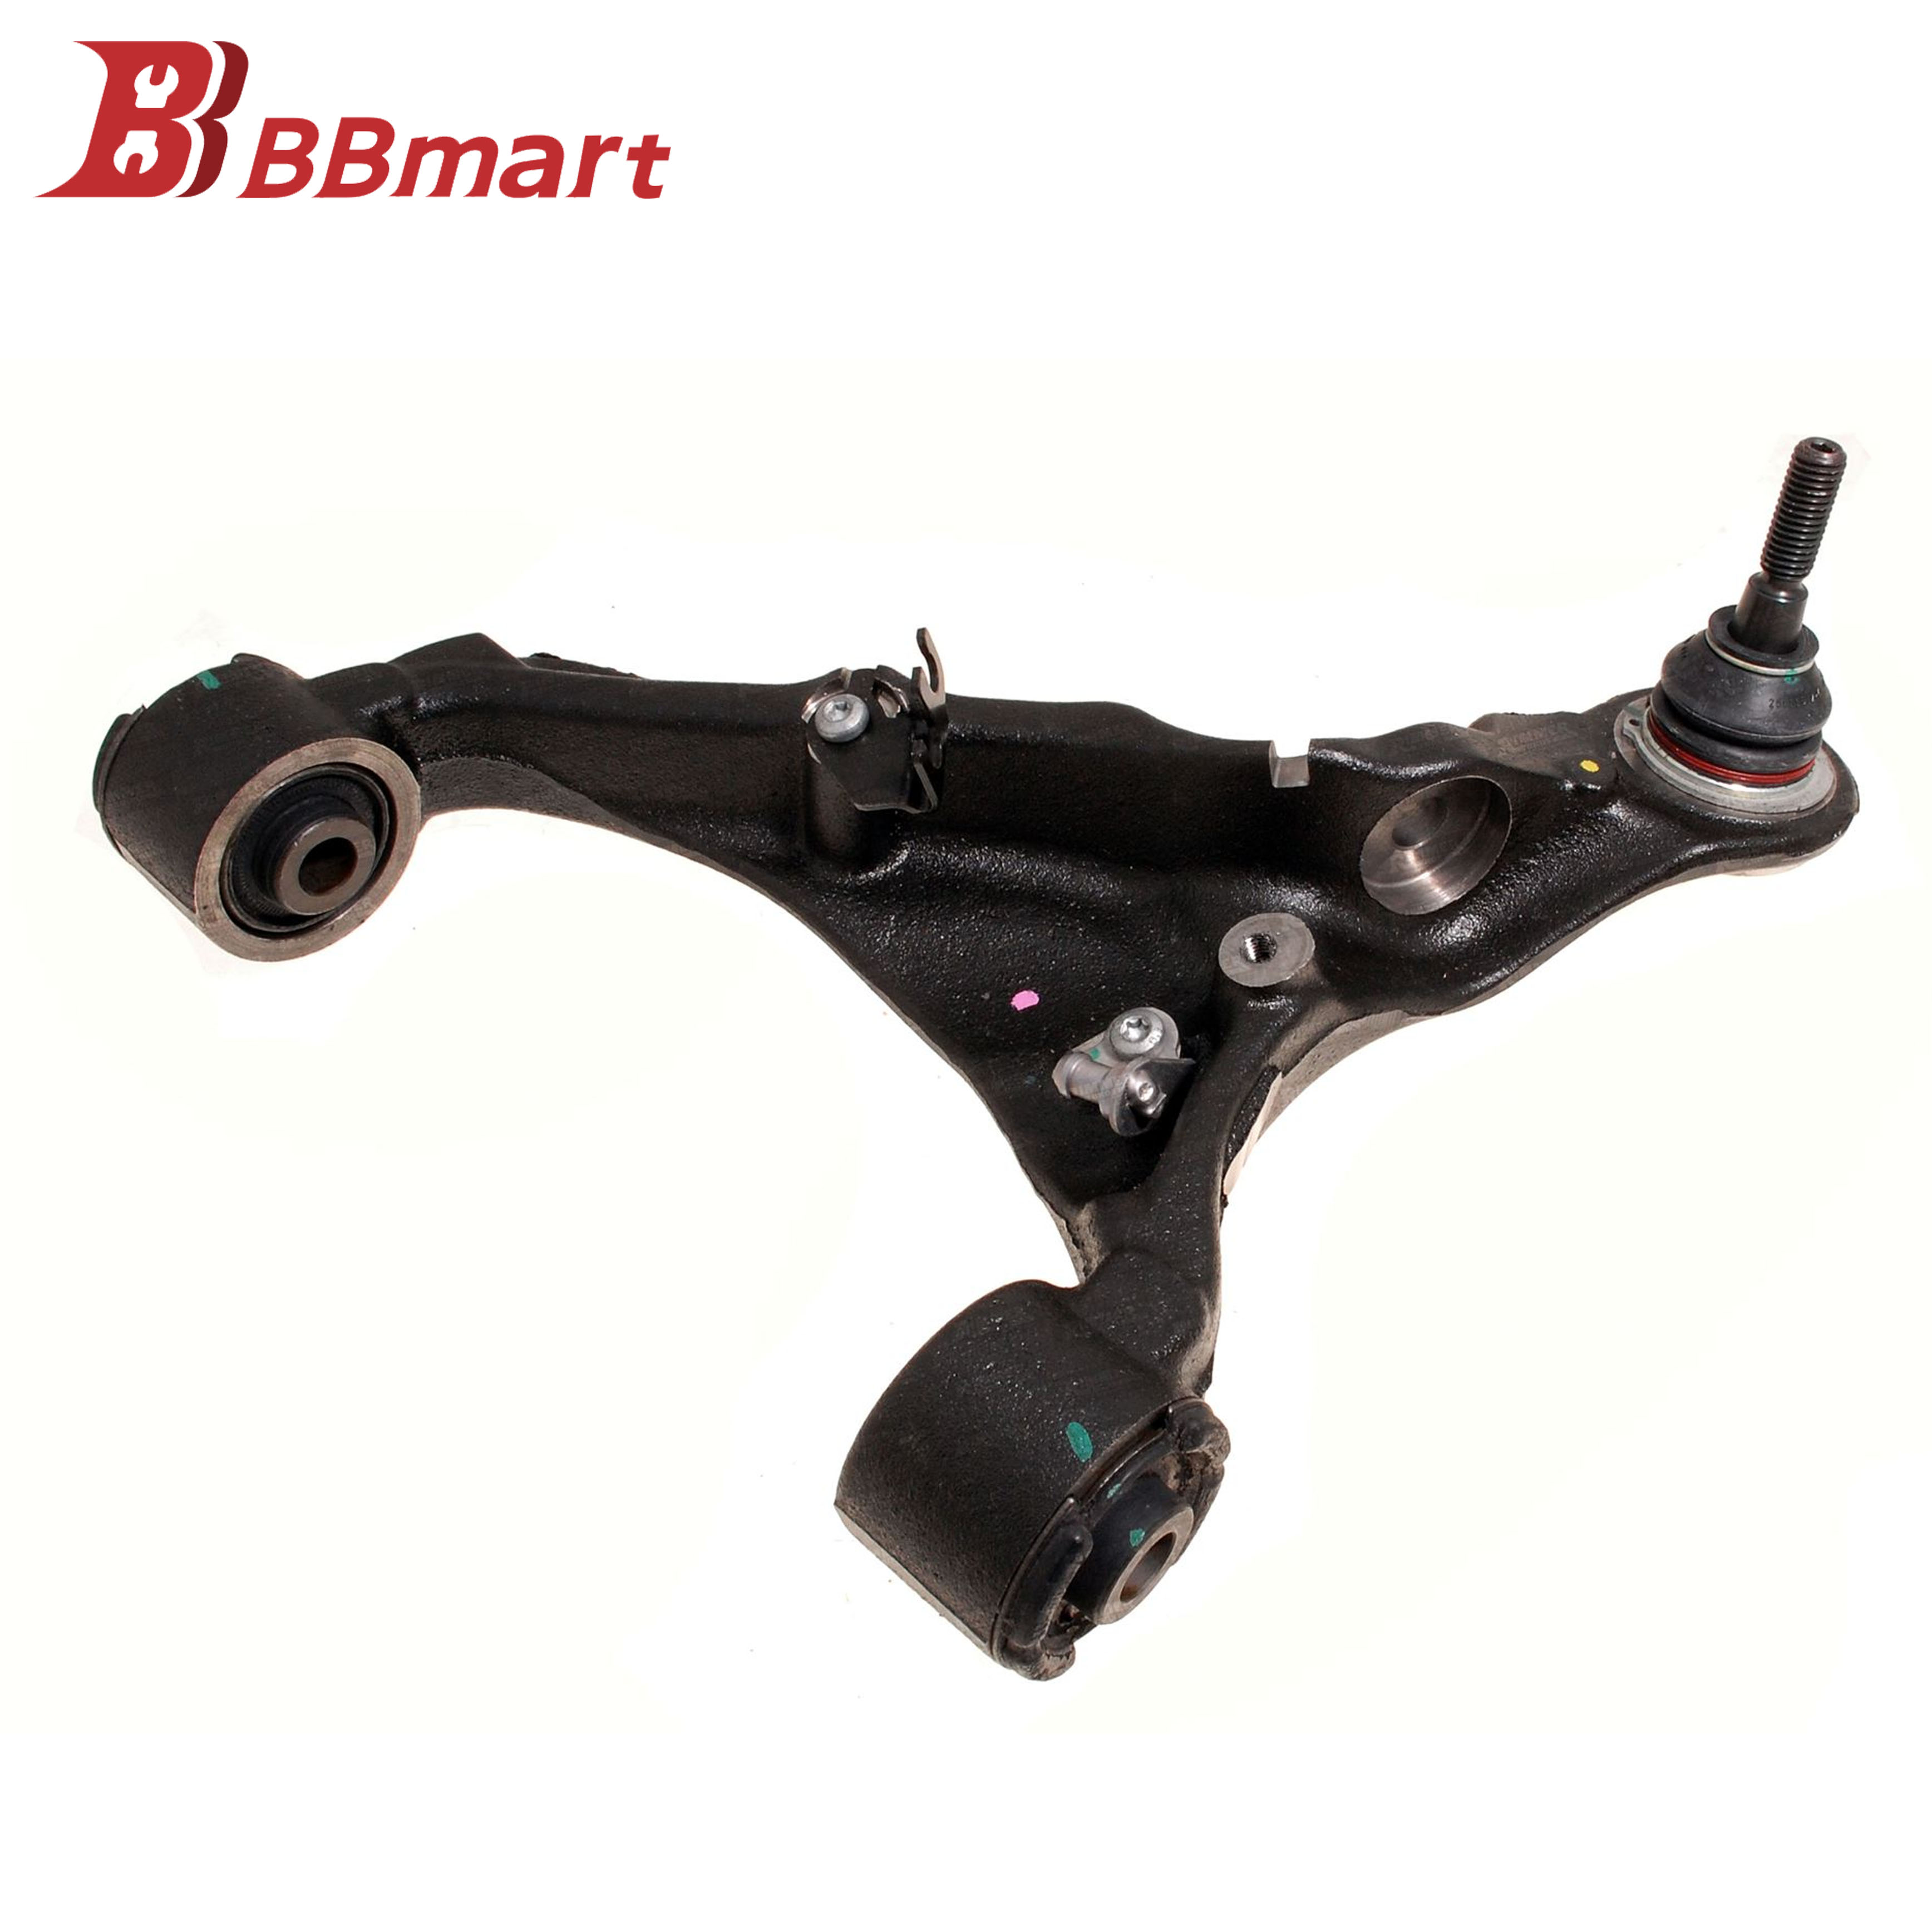 BBmart Auto Parts Front Upper Right Control Arm For Land Rover RANGE ROVER SPORT OE LR051617